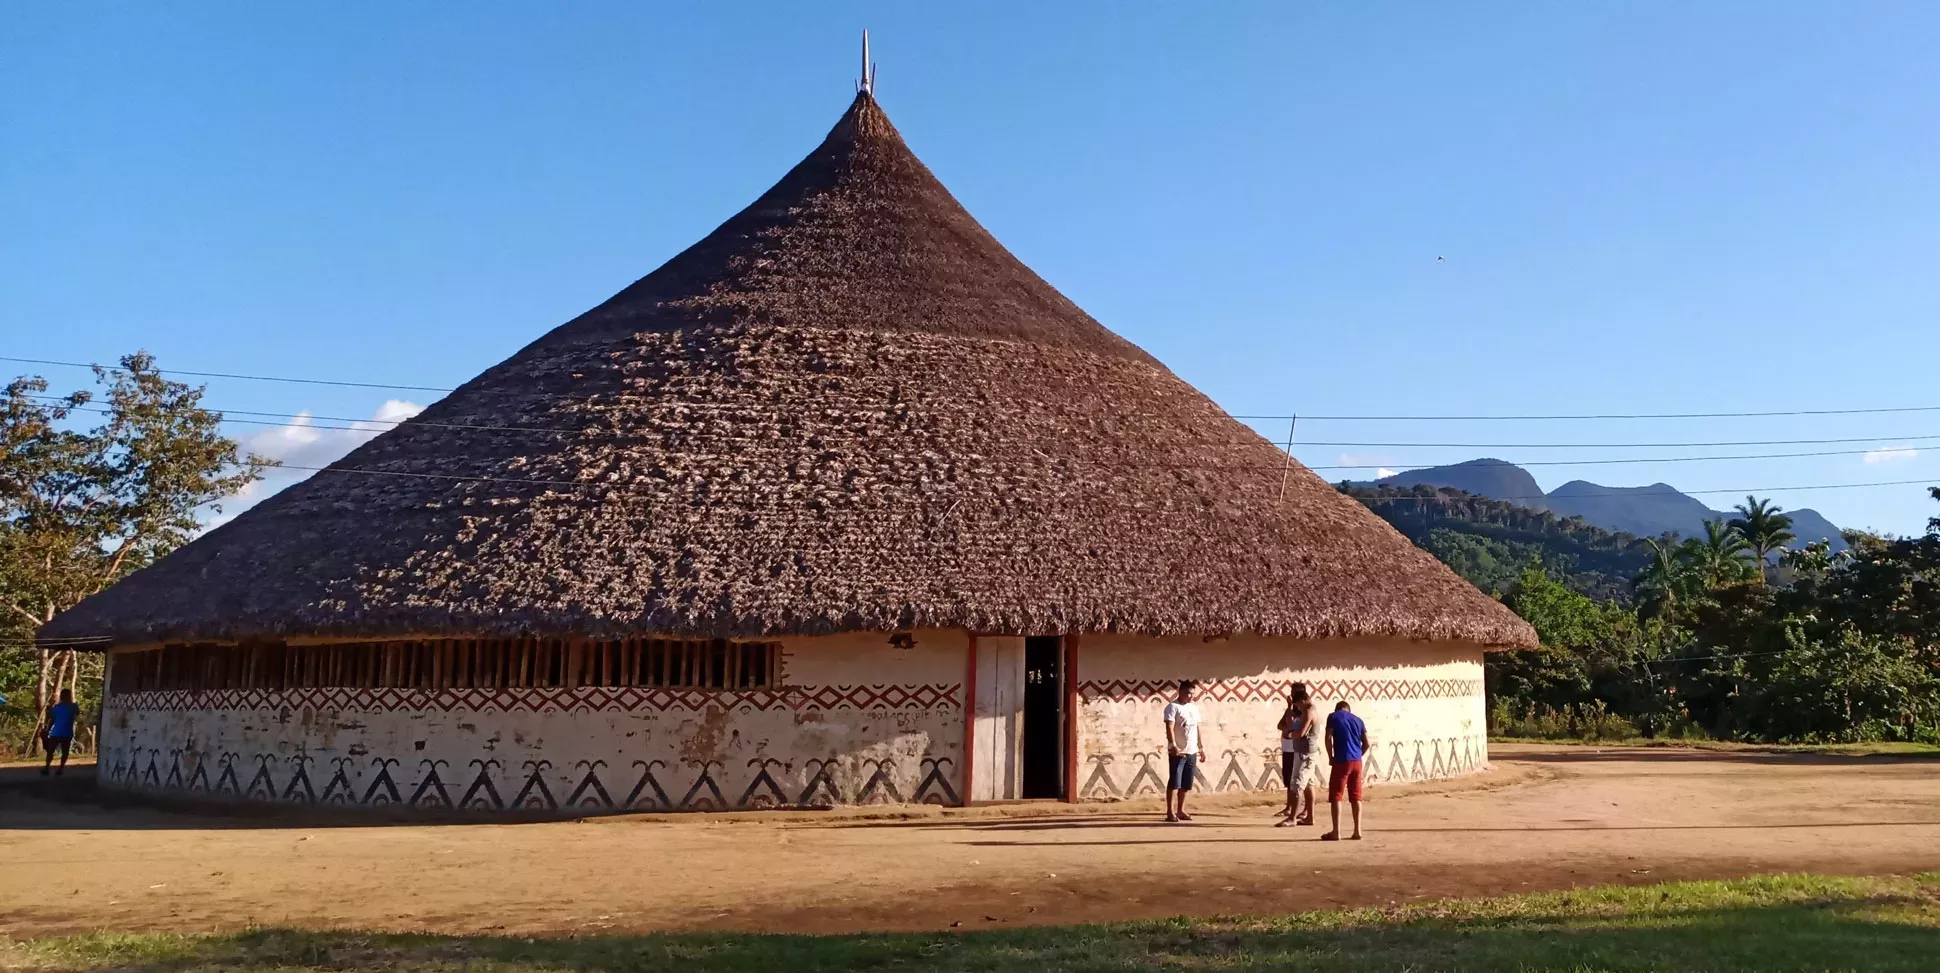 Large round stone hut with a thatched conical roof. Three people are stood in front and look very small in comparison. The sky is blue and the ground is dusty